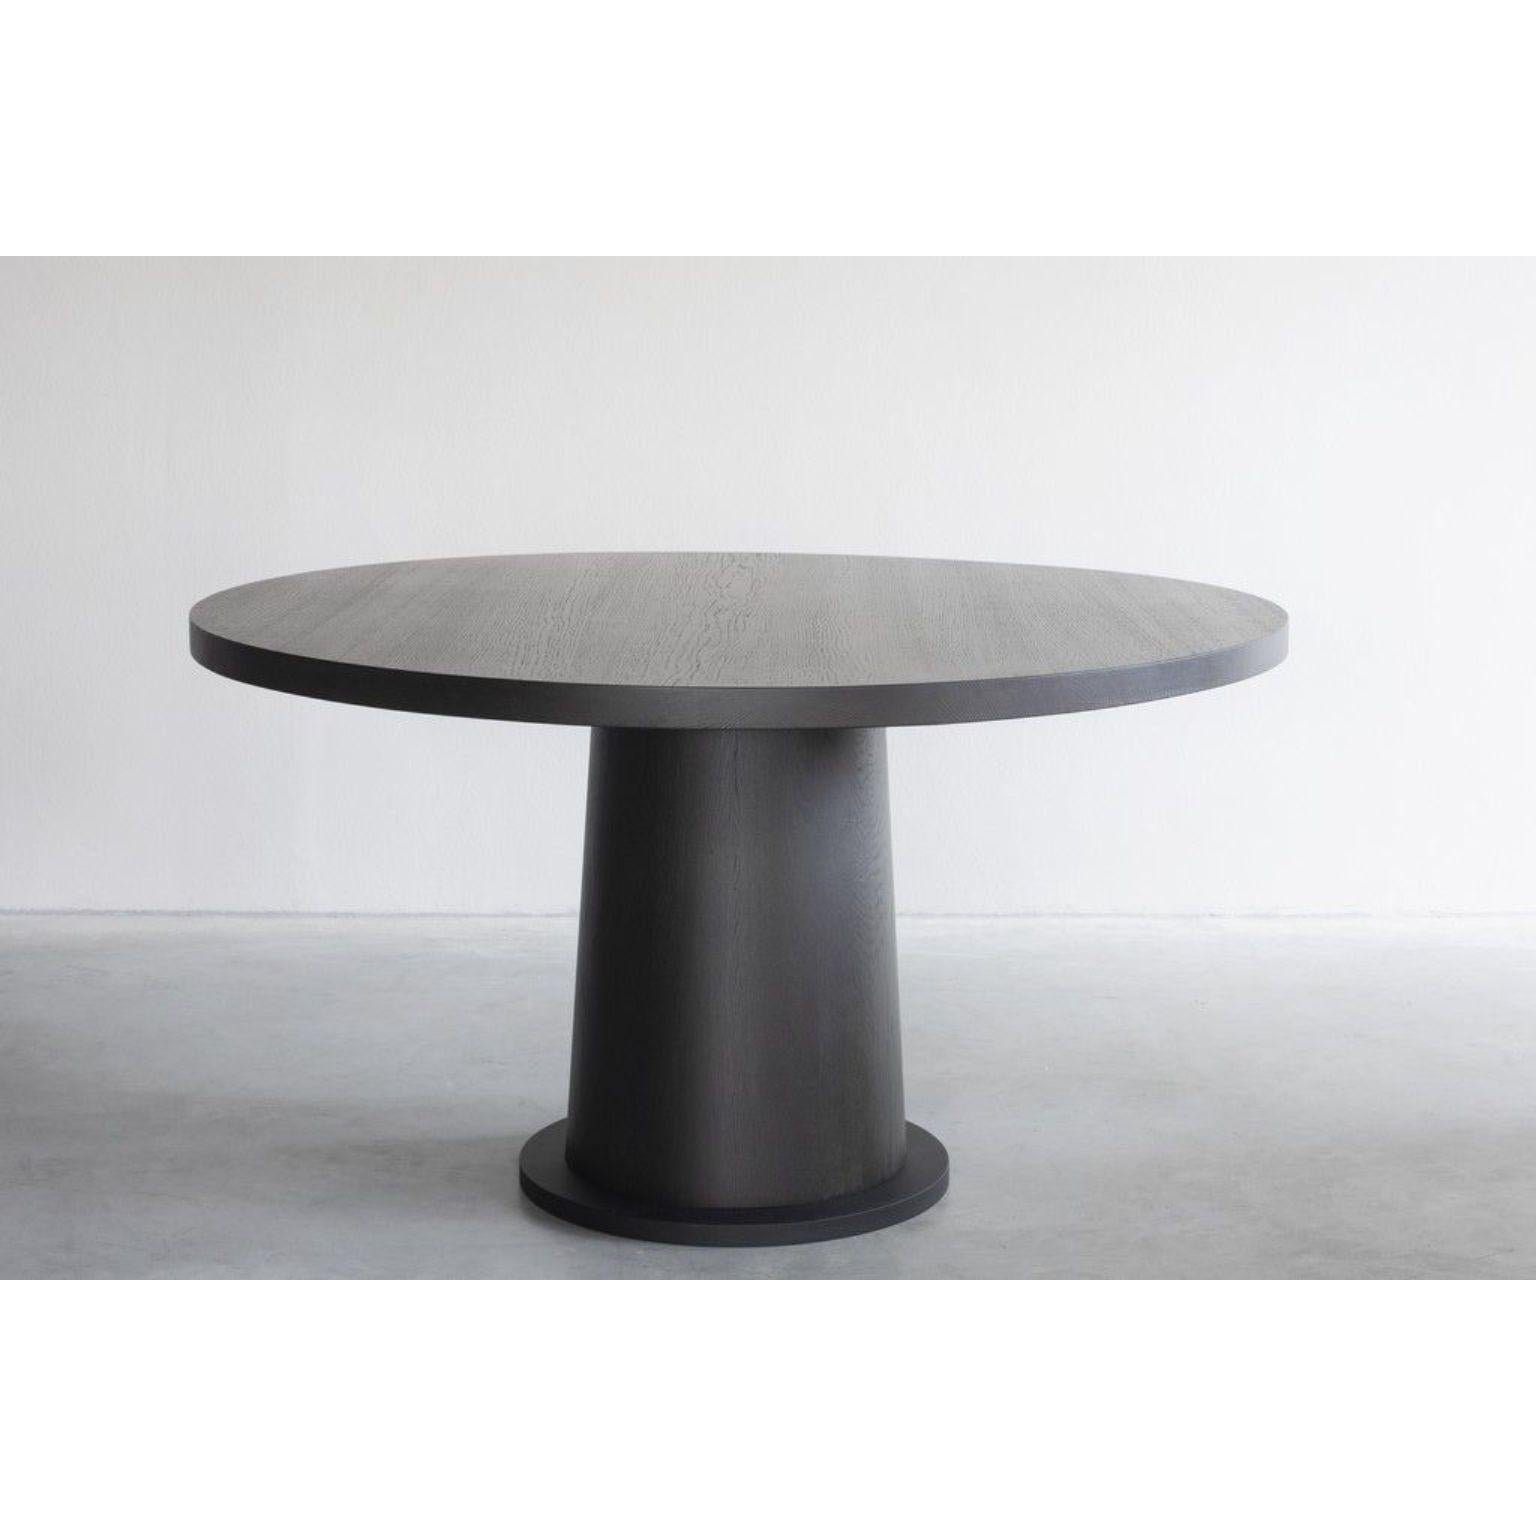 Kops dining table round one by Van Rossum
Dimensions: D147 x W147 x H75 cm
Materials: Oak, Steel.

The wood is available in all standard Van Rossum colors, or in a matching finish to customer’s own sample.
The steel is available in four colors